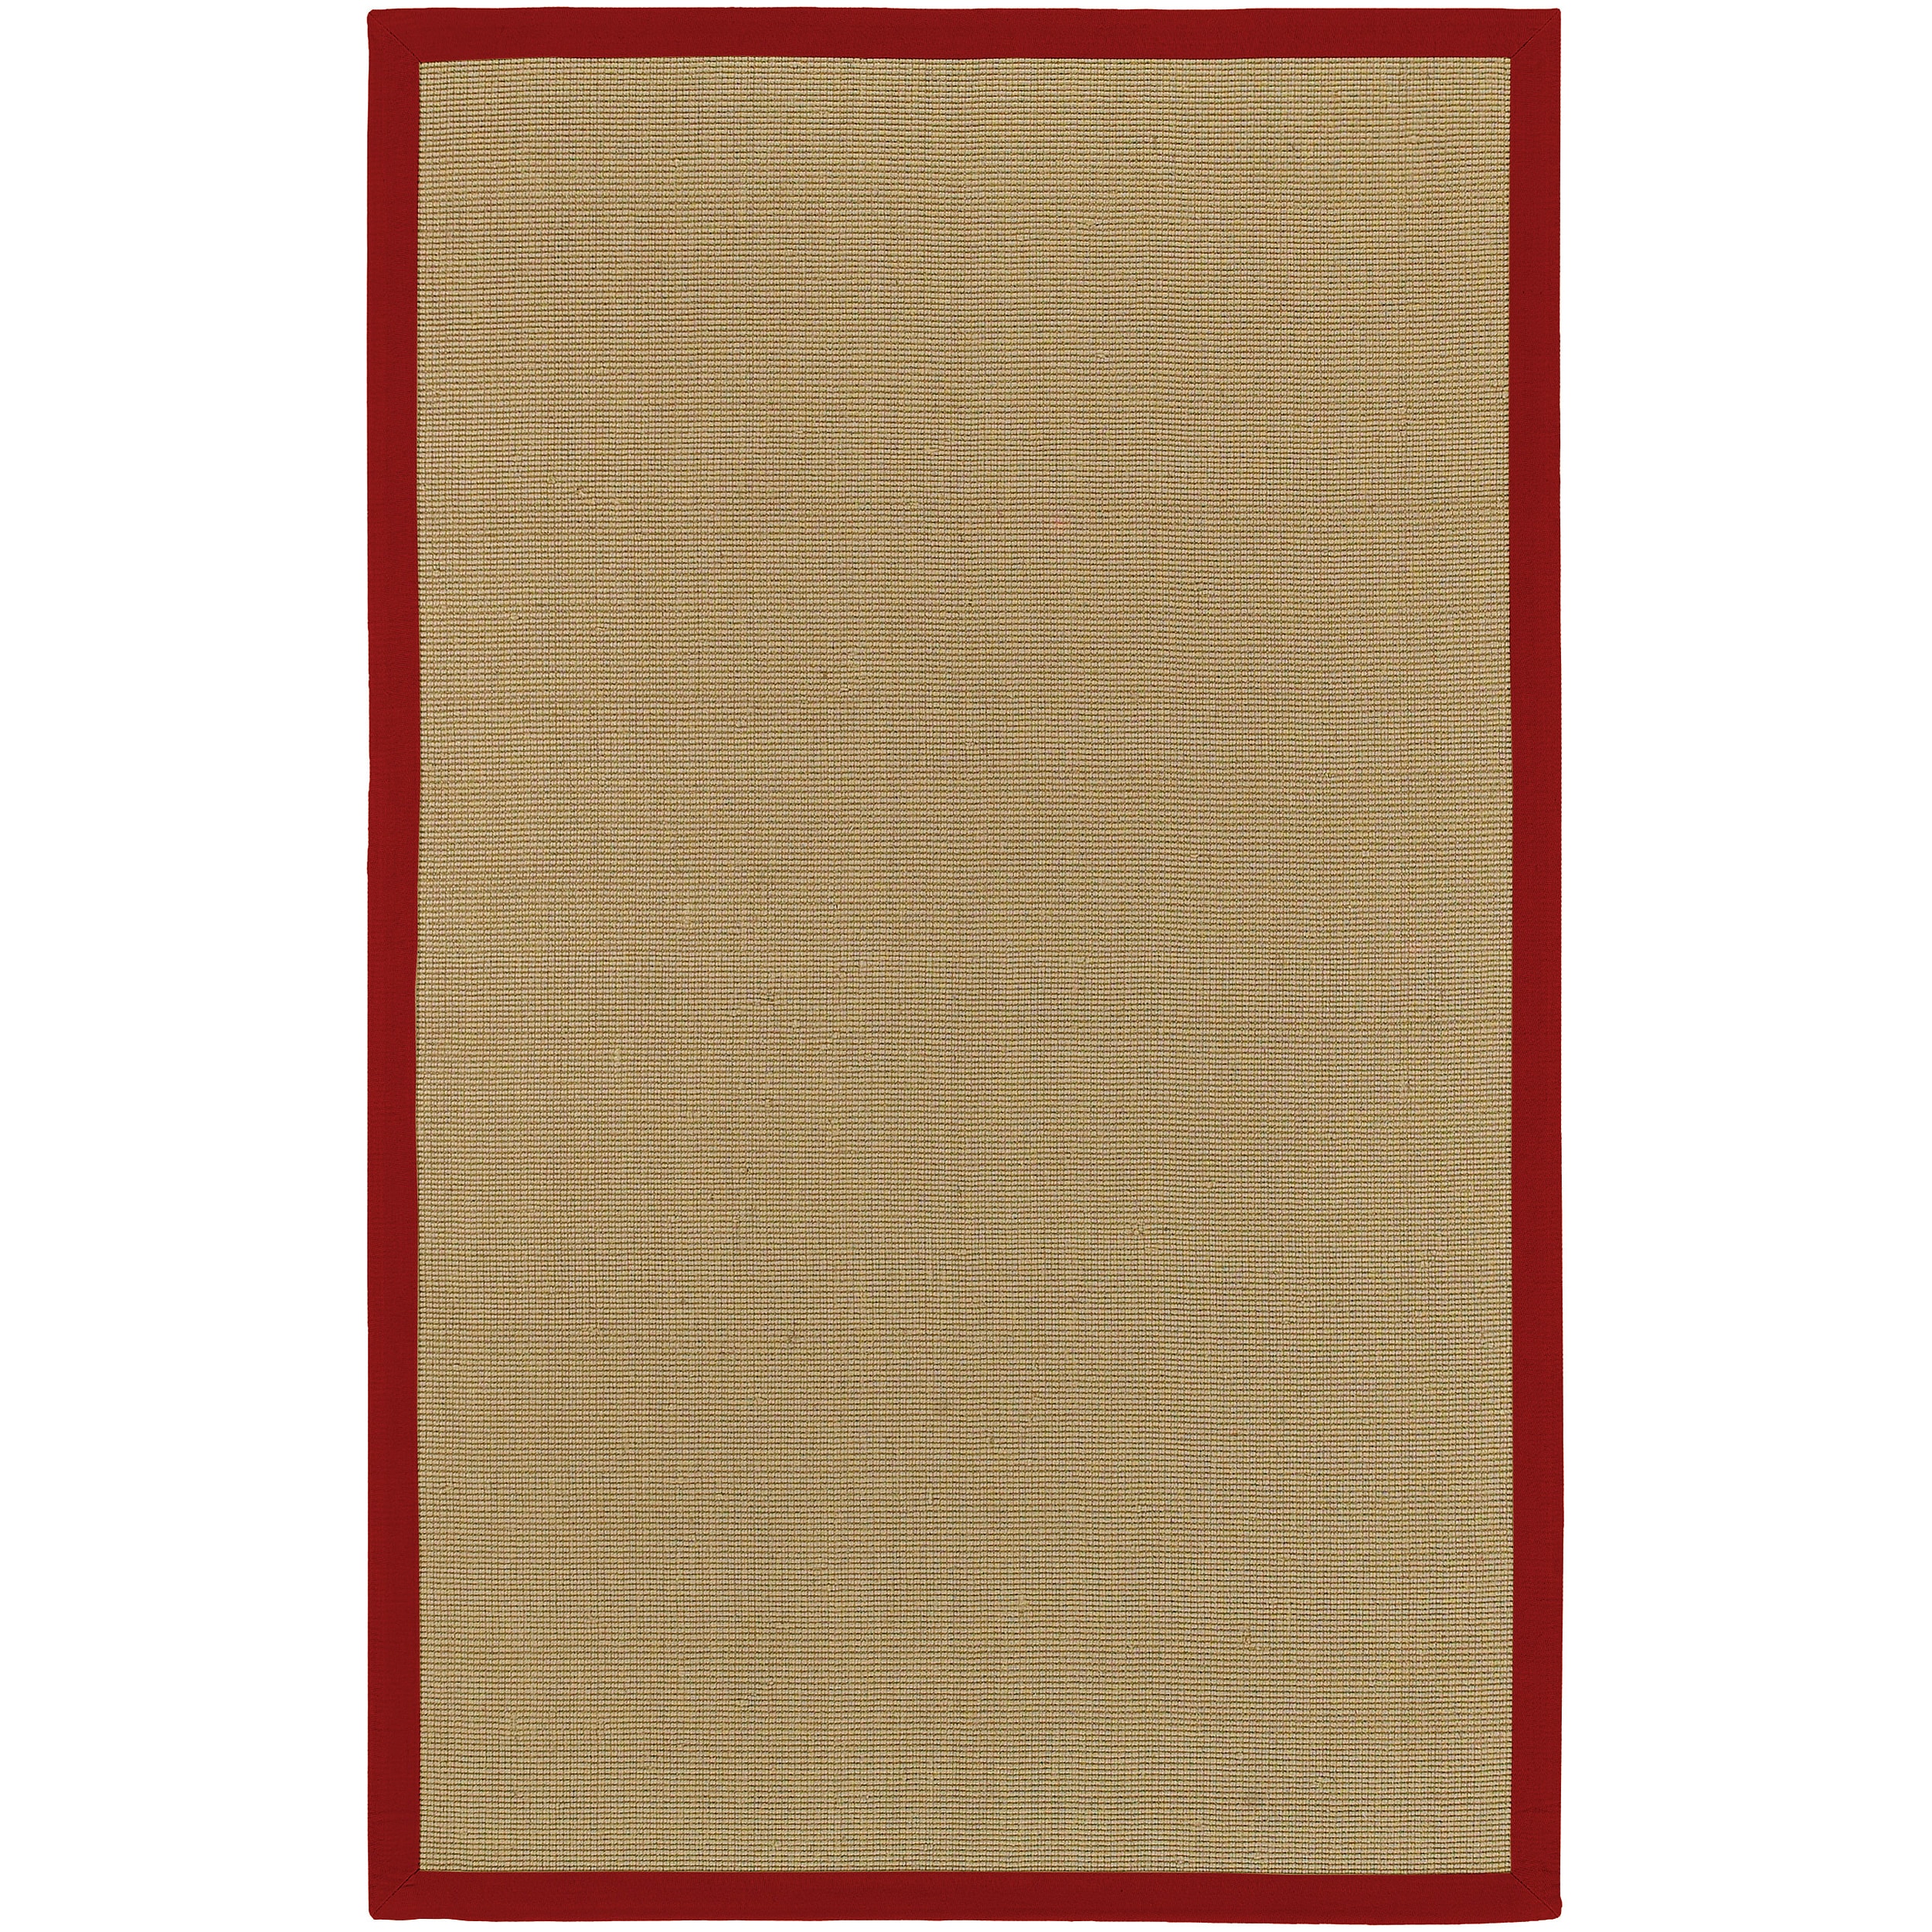 Woven Town Sisal With Red Cotton Border Rug (4 X 6)